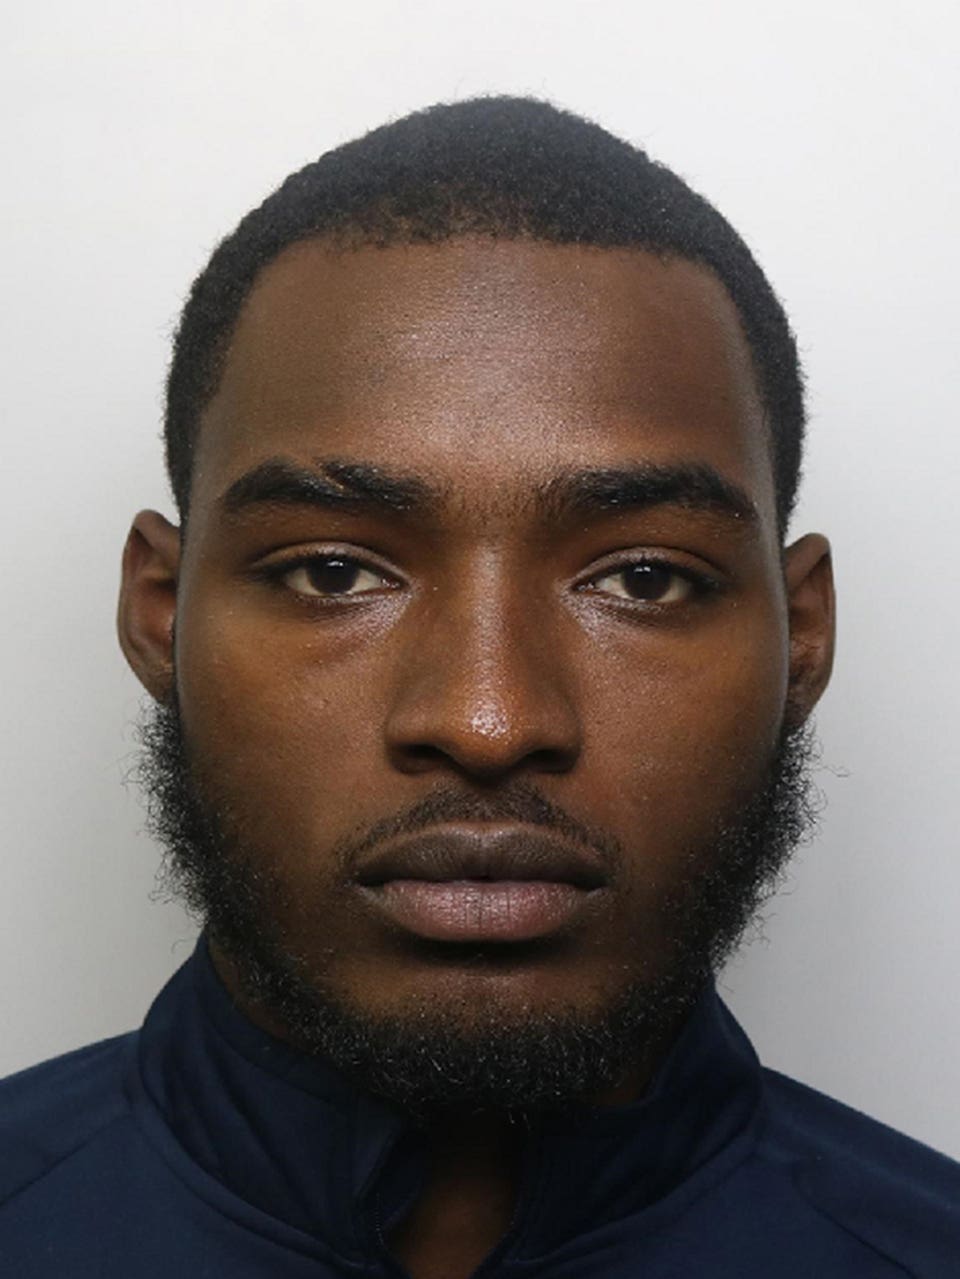 Man Jailed For Life For Murder Of Young Athlete Over ‘funny Look